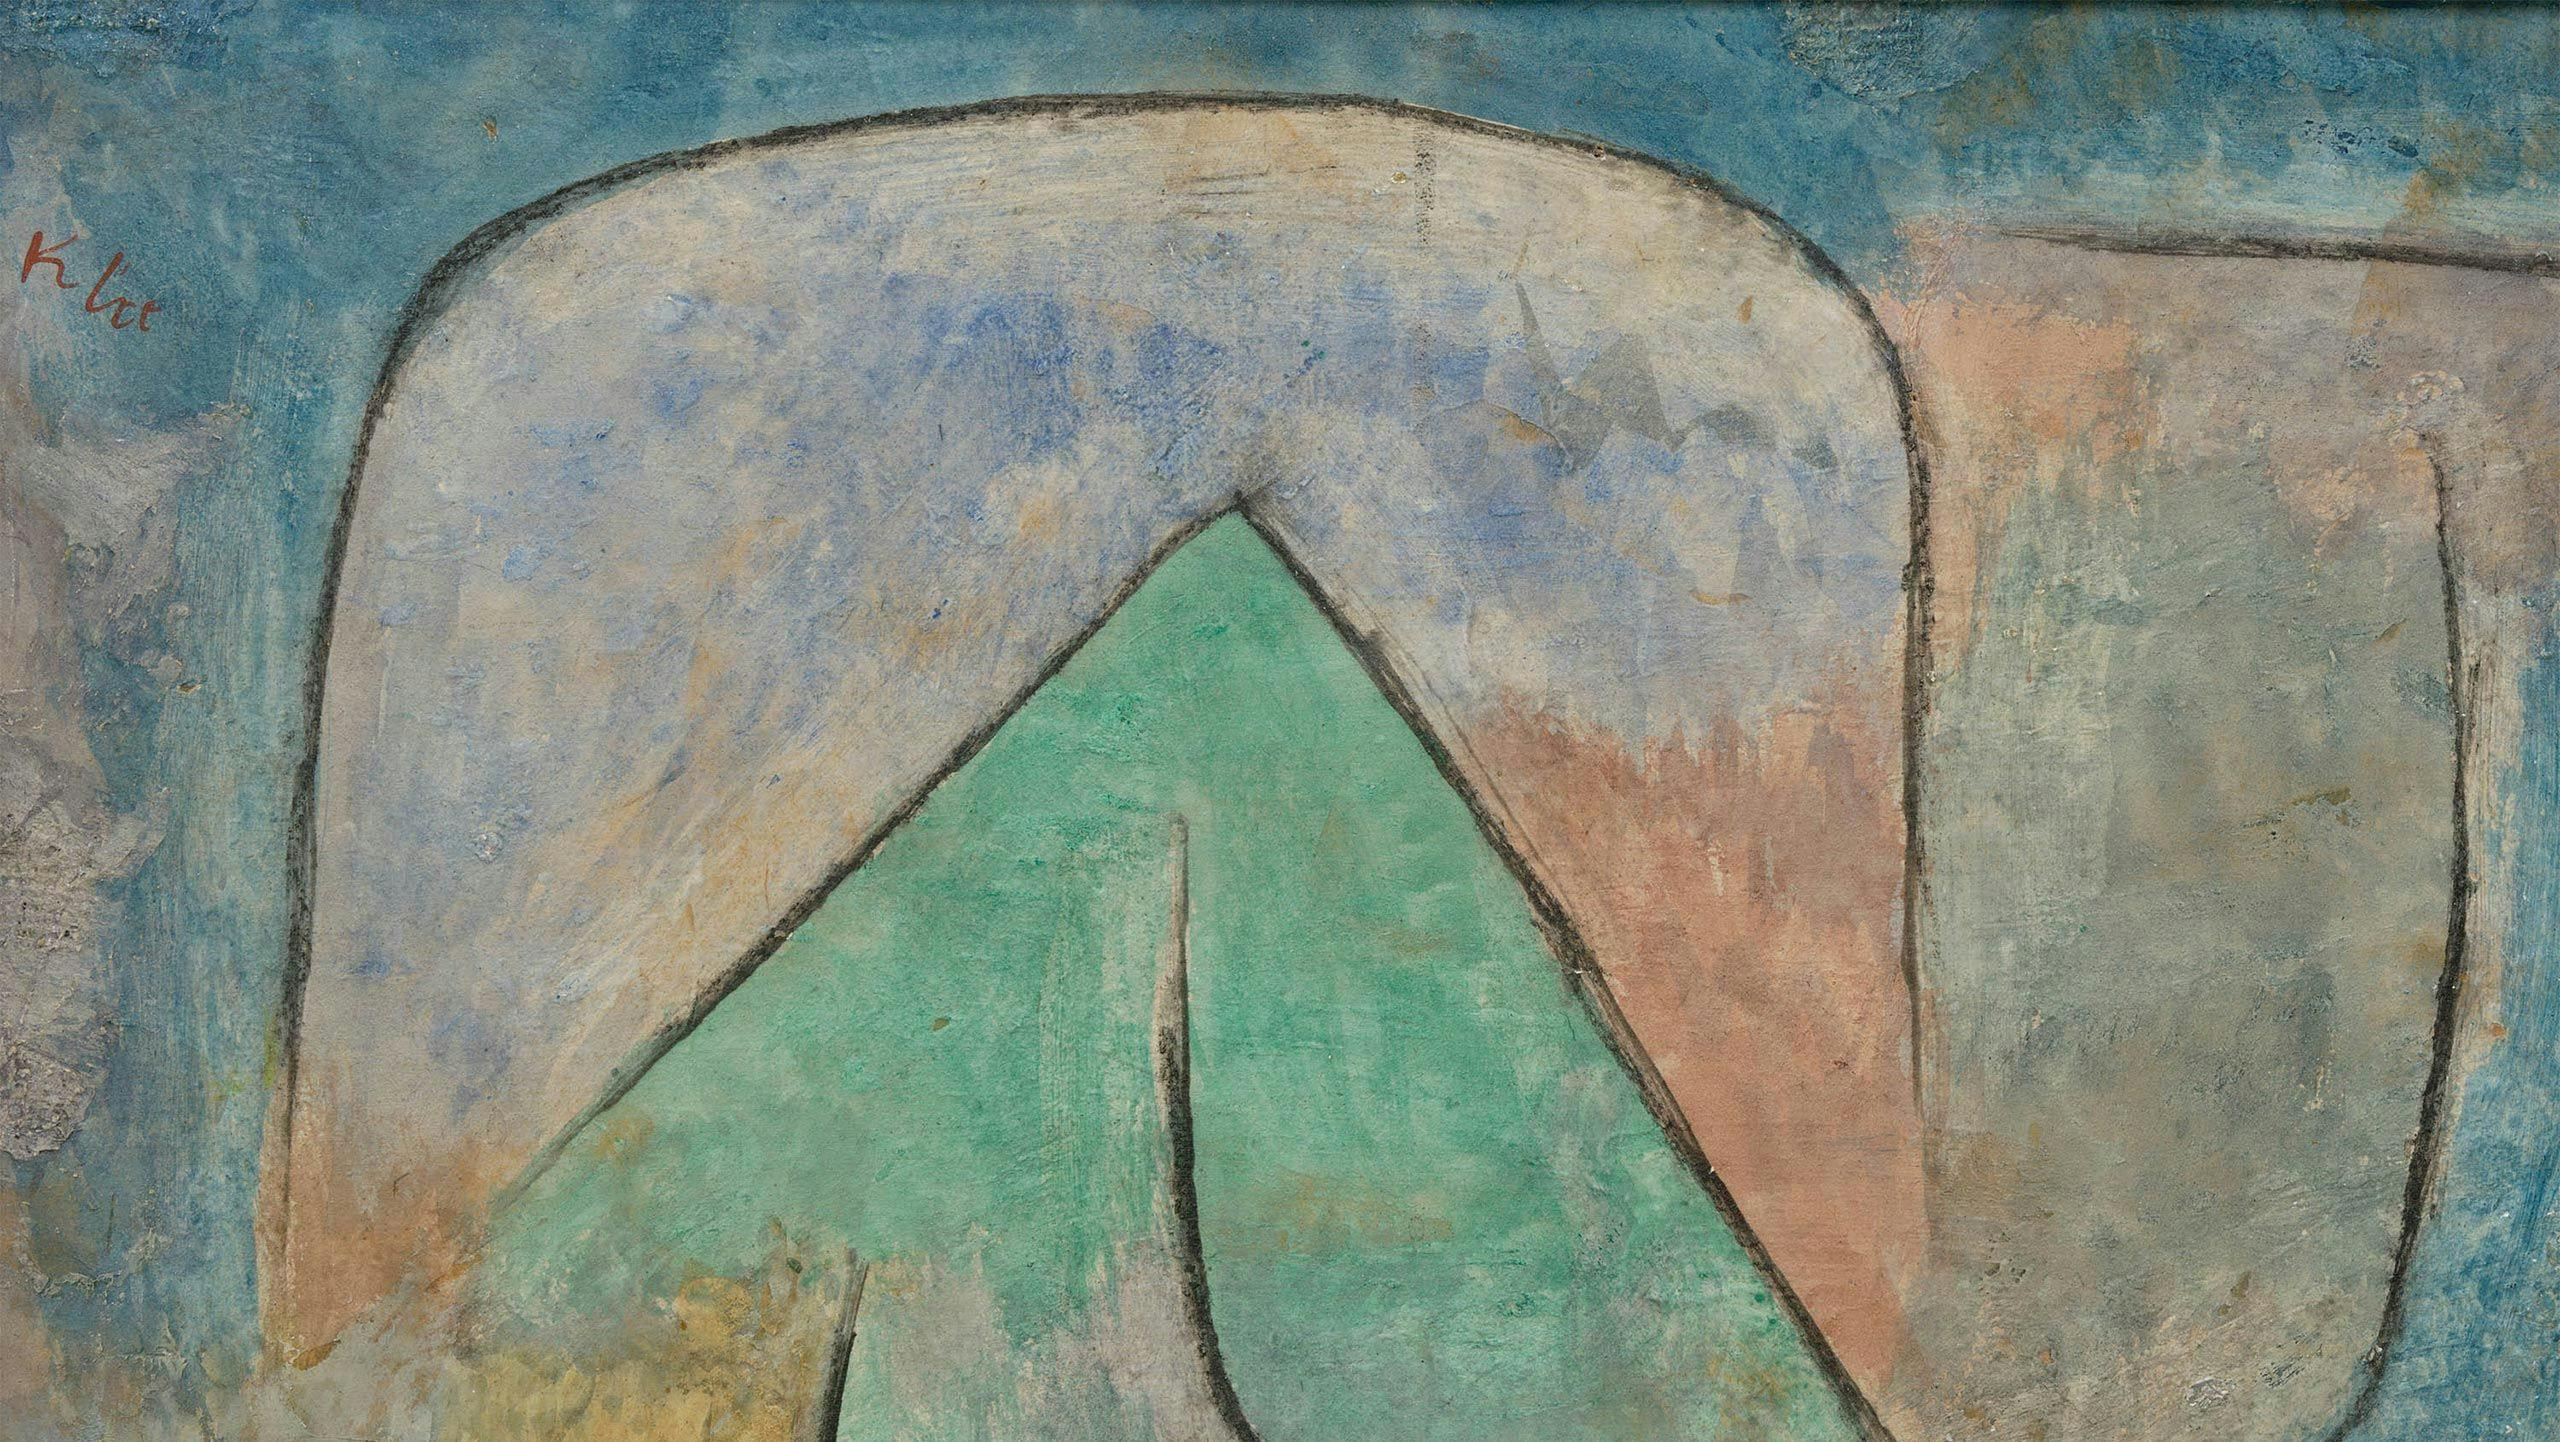 An artwork by Paul Klee titled Stromfahrt (Journey down river), dated 1937.